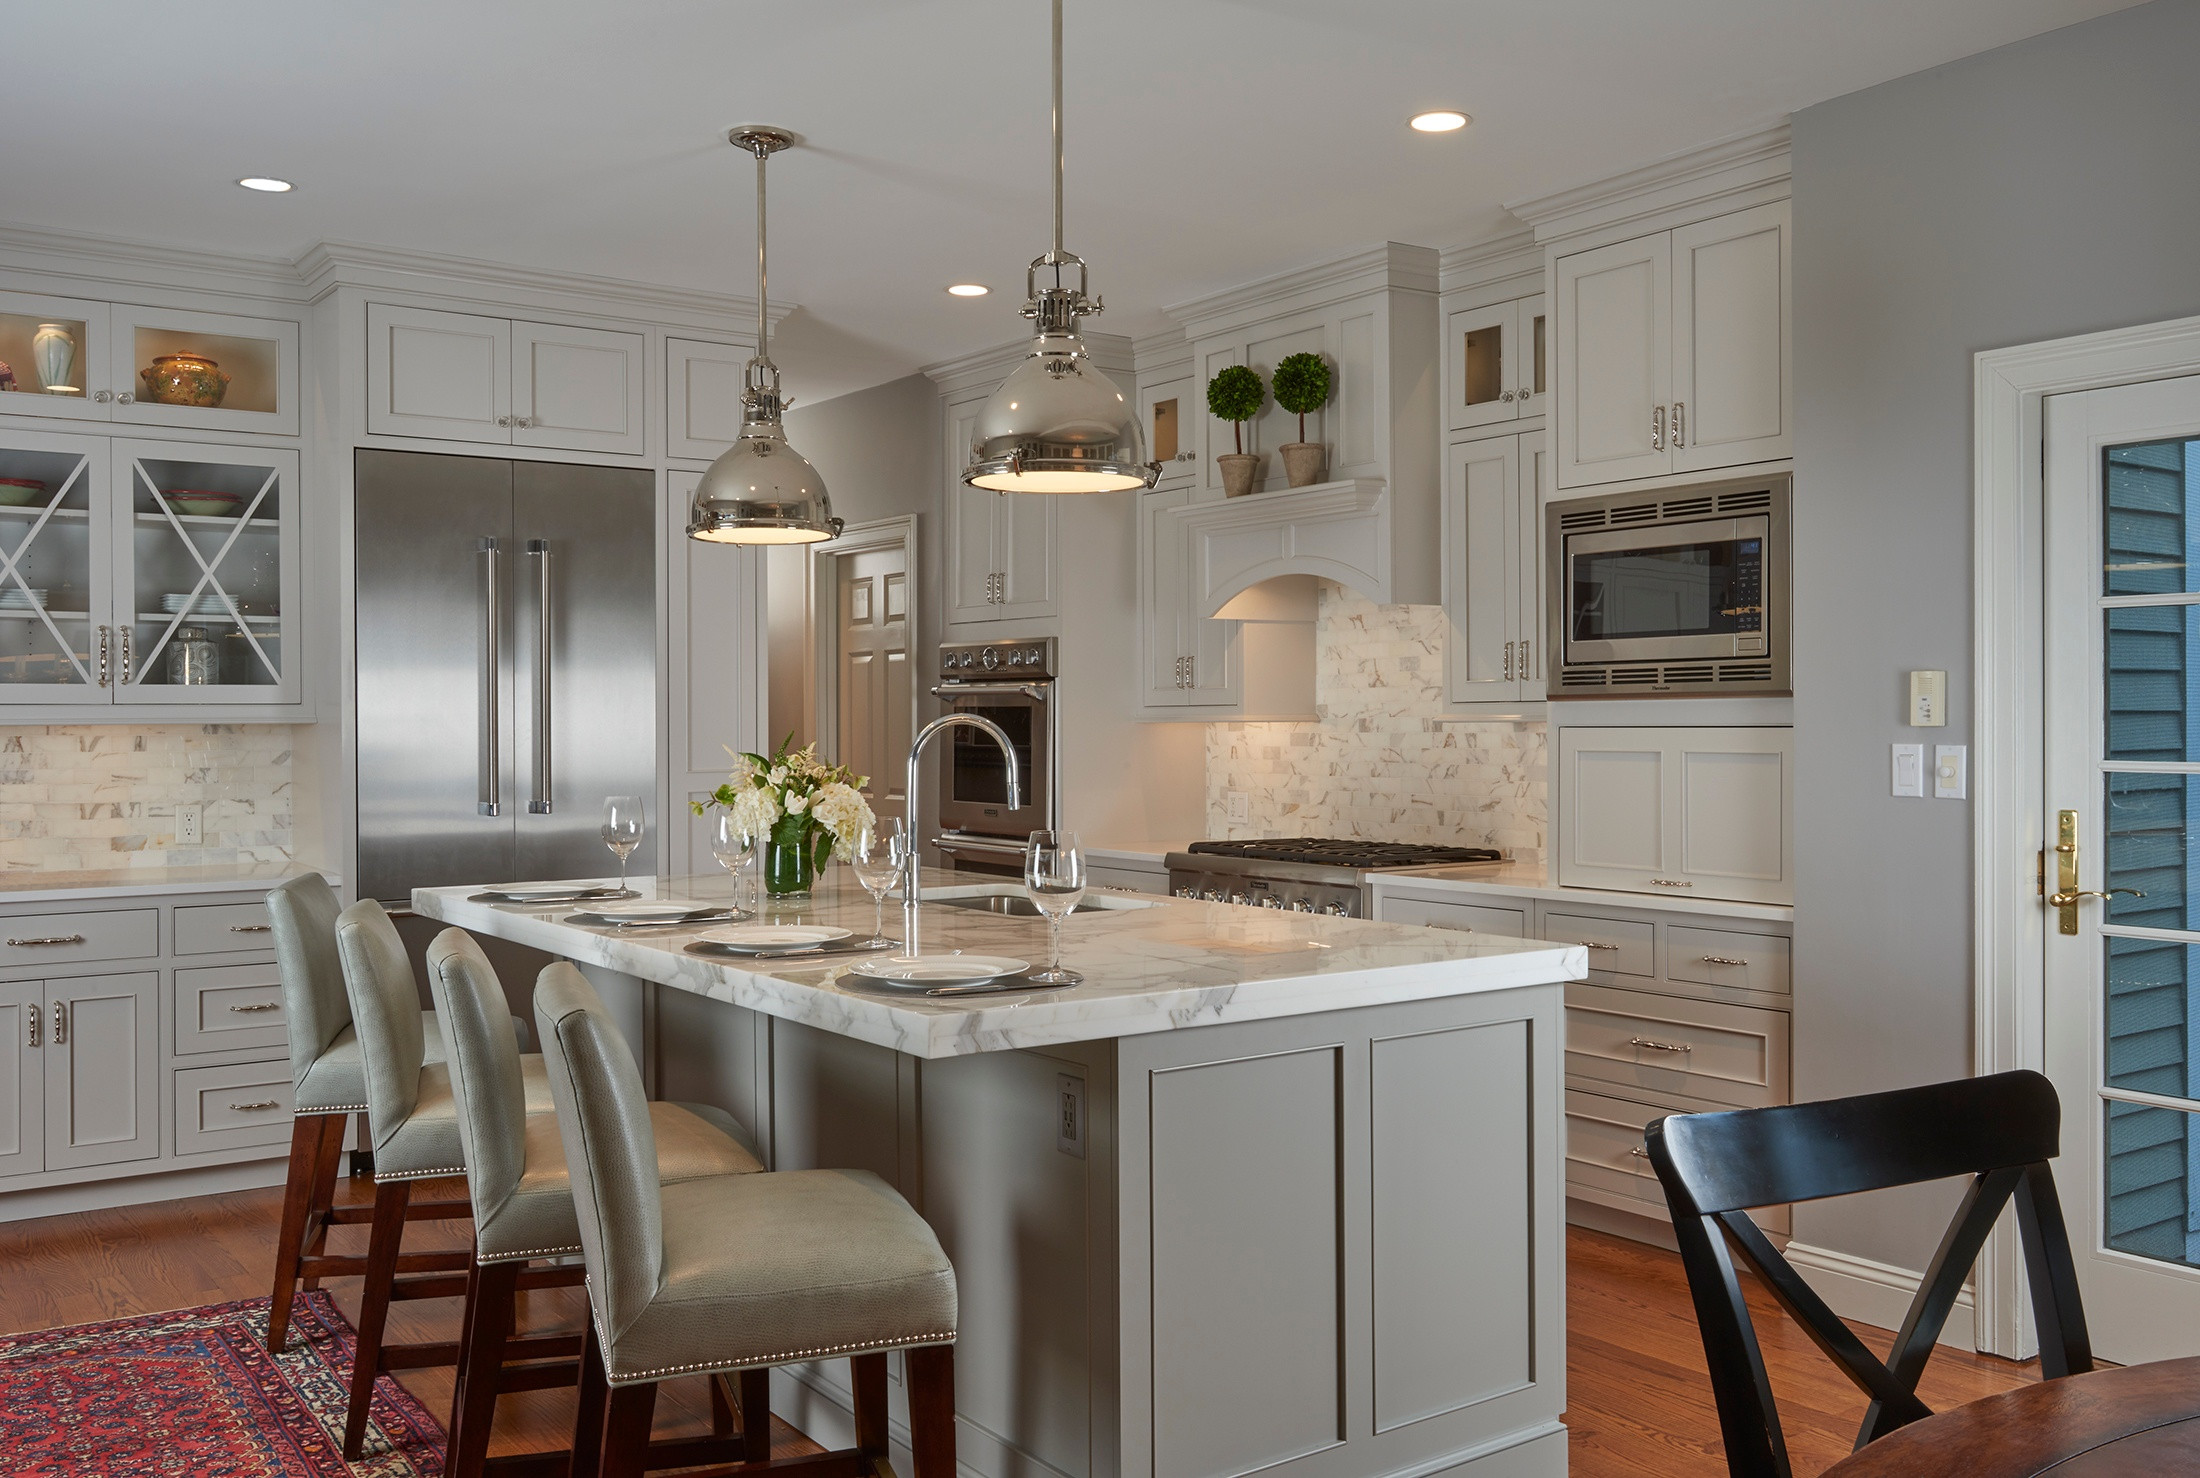 Remodeling Your Kitchen
 How to Create a Realistic Bud for Your Kitchen Remodel